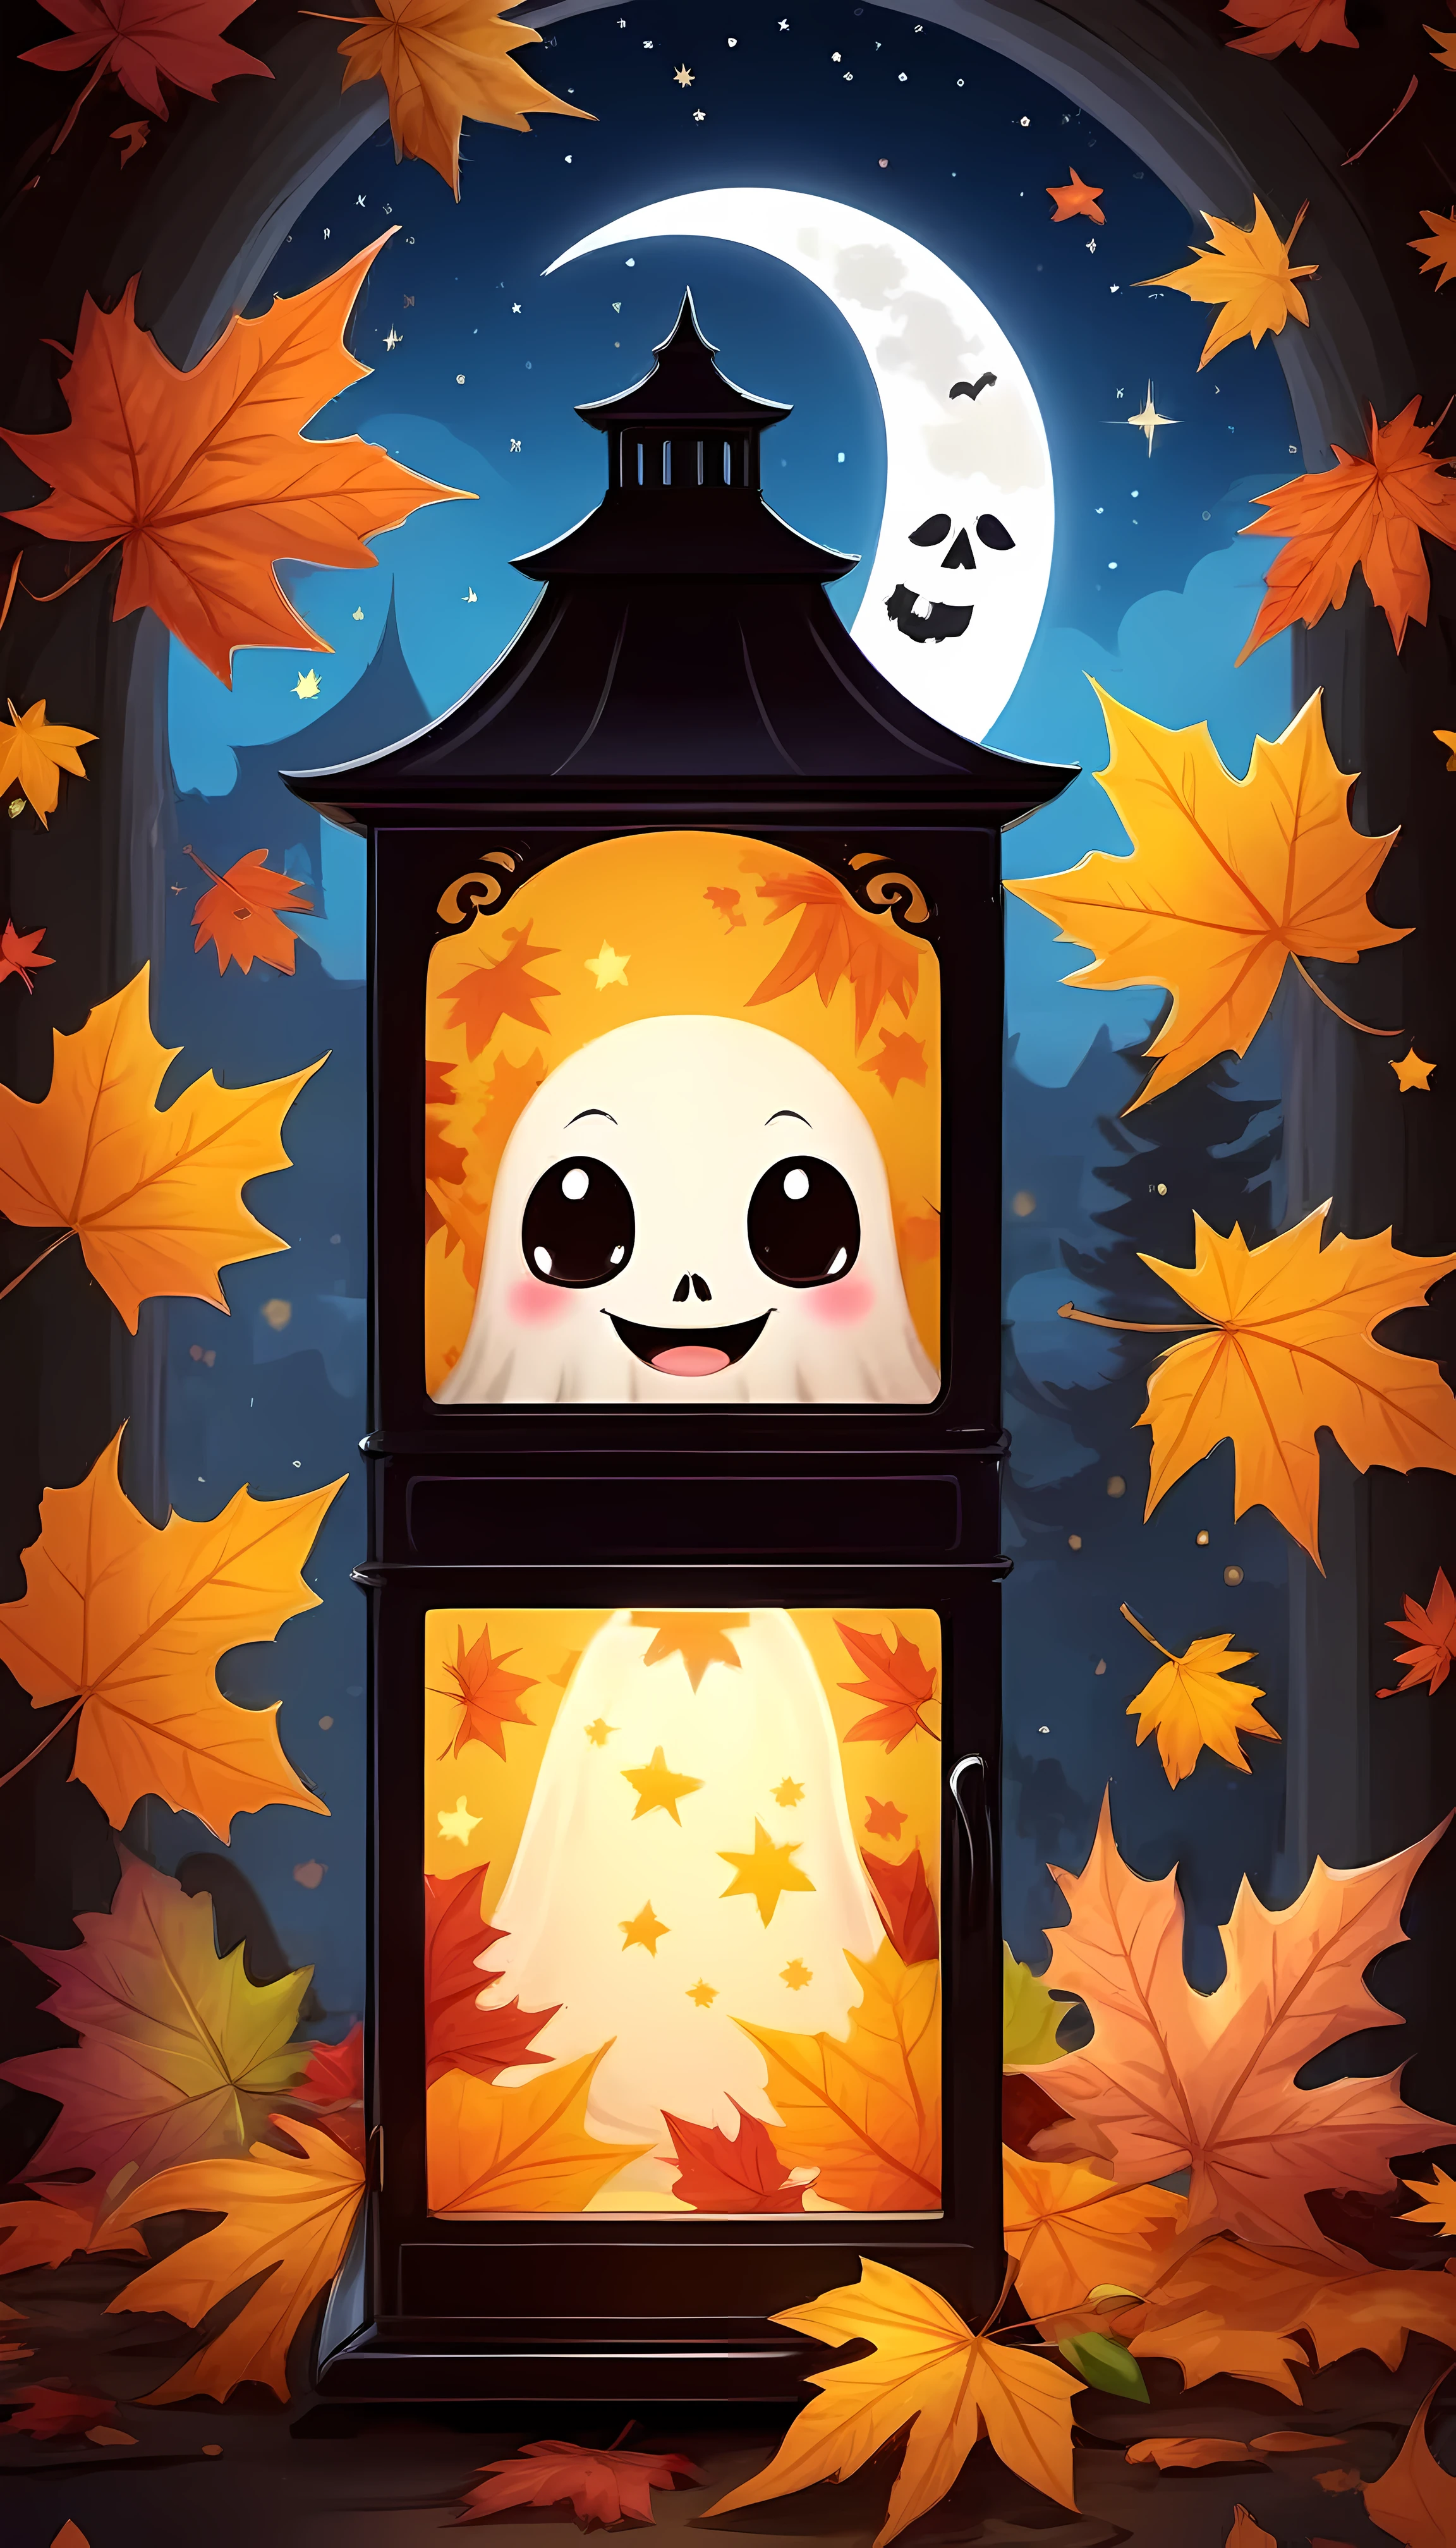 CuteCartoonAF, Cute Cartoon, masterpiece in maximum 16K resolution, superb quality, (a big sticker) on the modern fridge, designed as a cheerful ghost character holding a glowing lantern, floating amidst (colorful) autumn leaves, a friendly smile and playful expression, with the lantern emitting a warm inviting light, surrounded with twinkling stars and a crescent moon in the night magical sky, intricate gothic symbolore_Detail))
